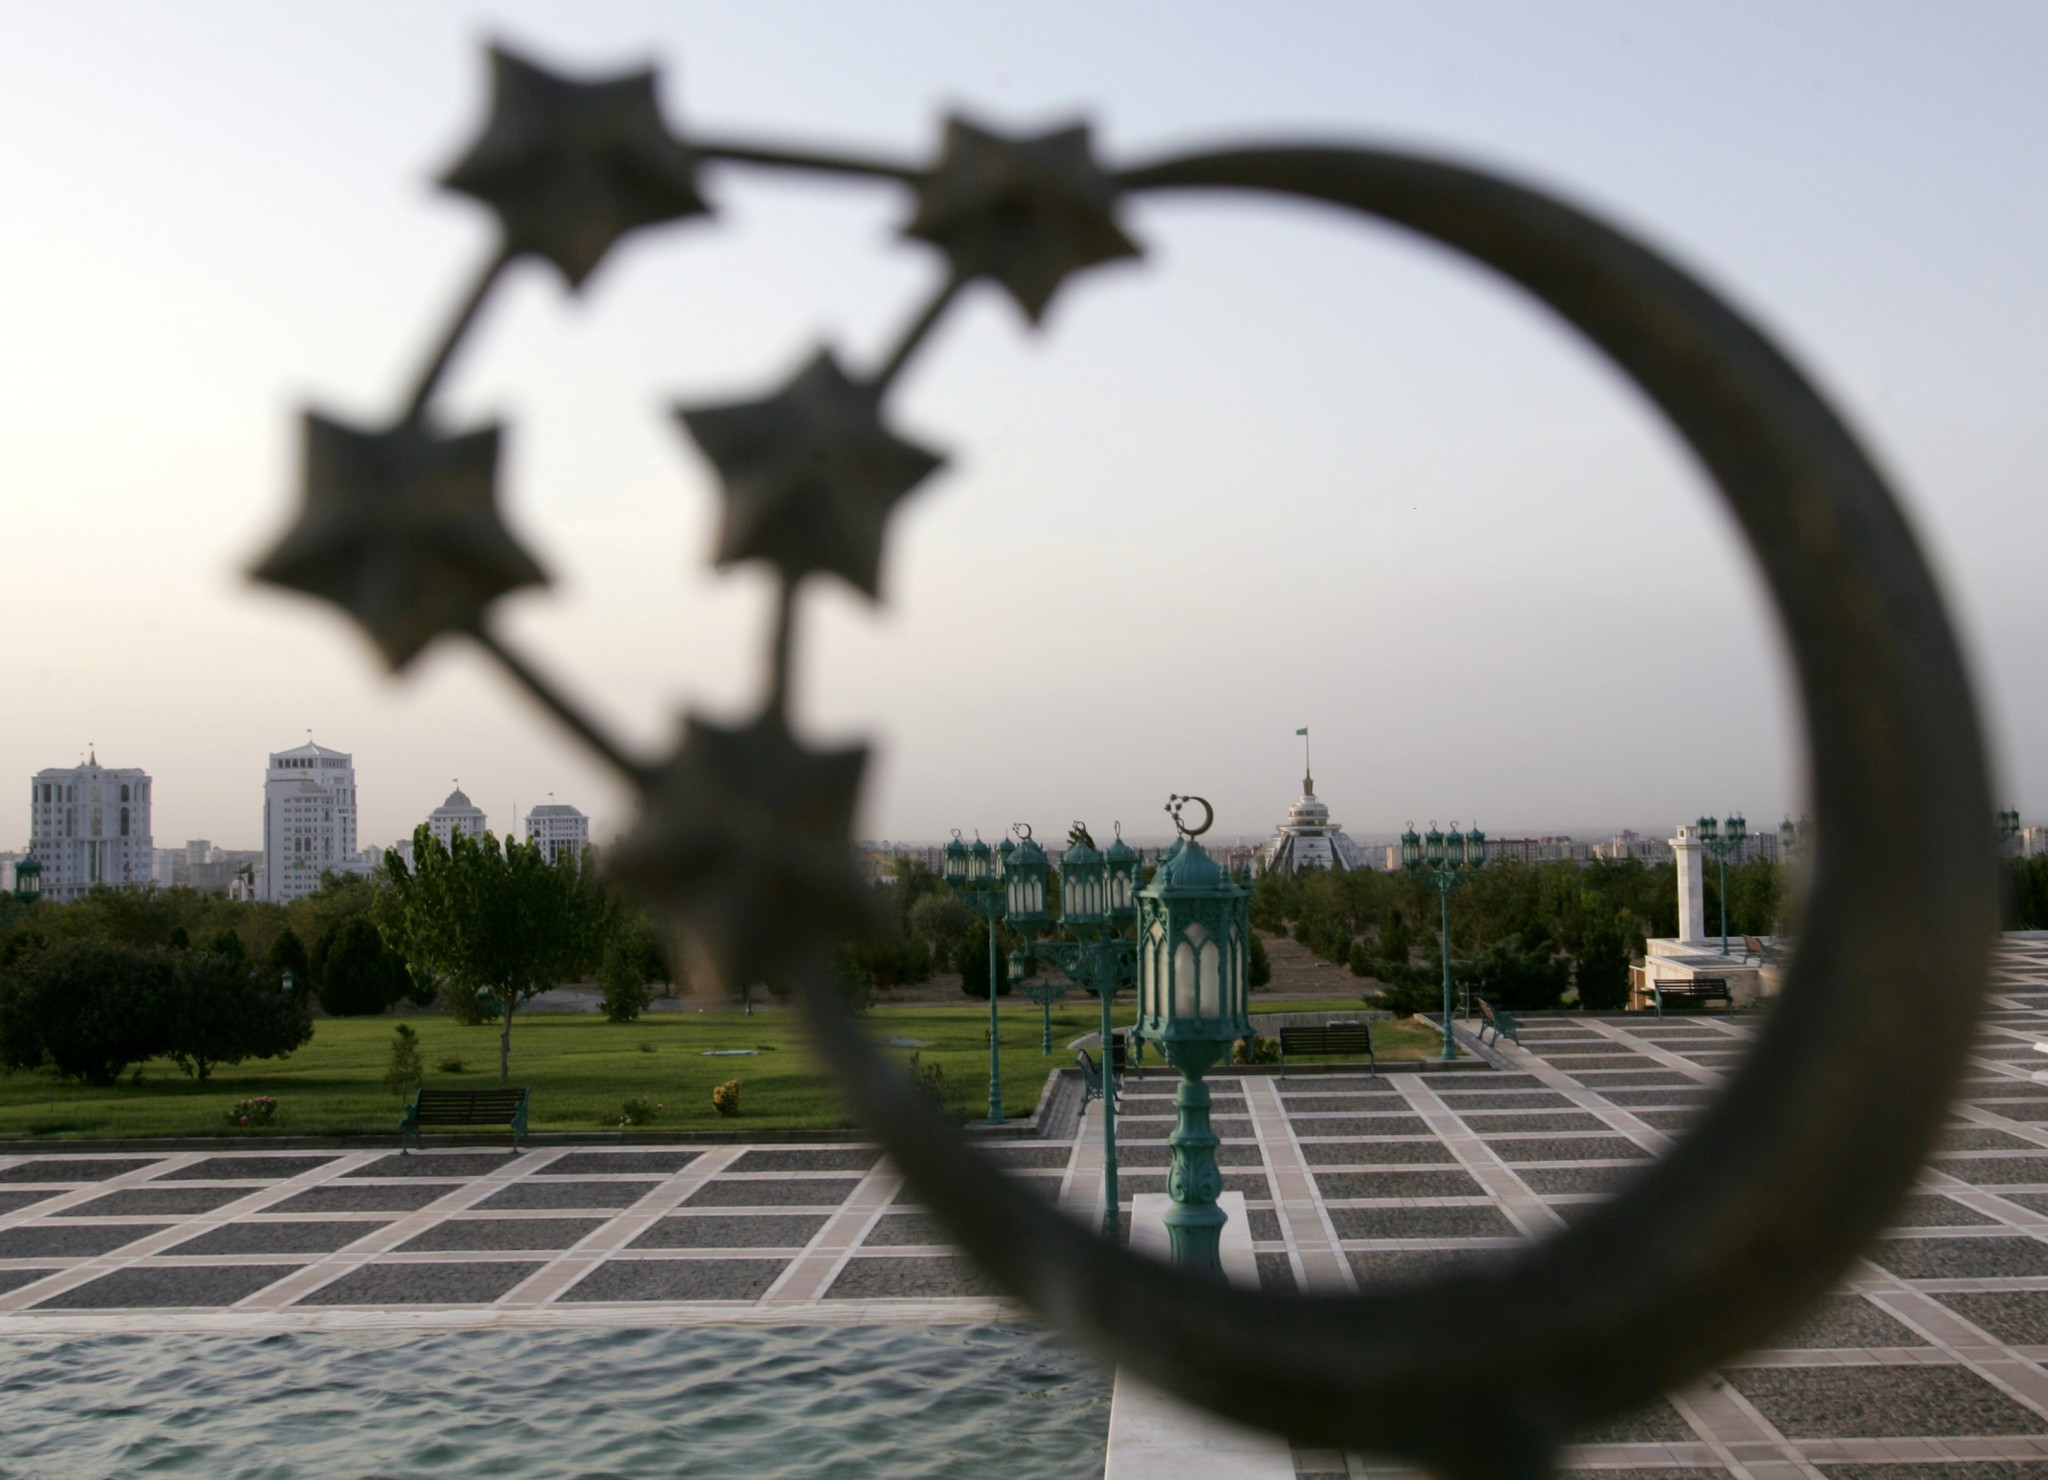 Ashgabat will host the Games next month ©Getty Images